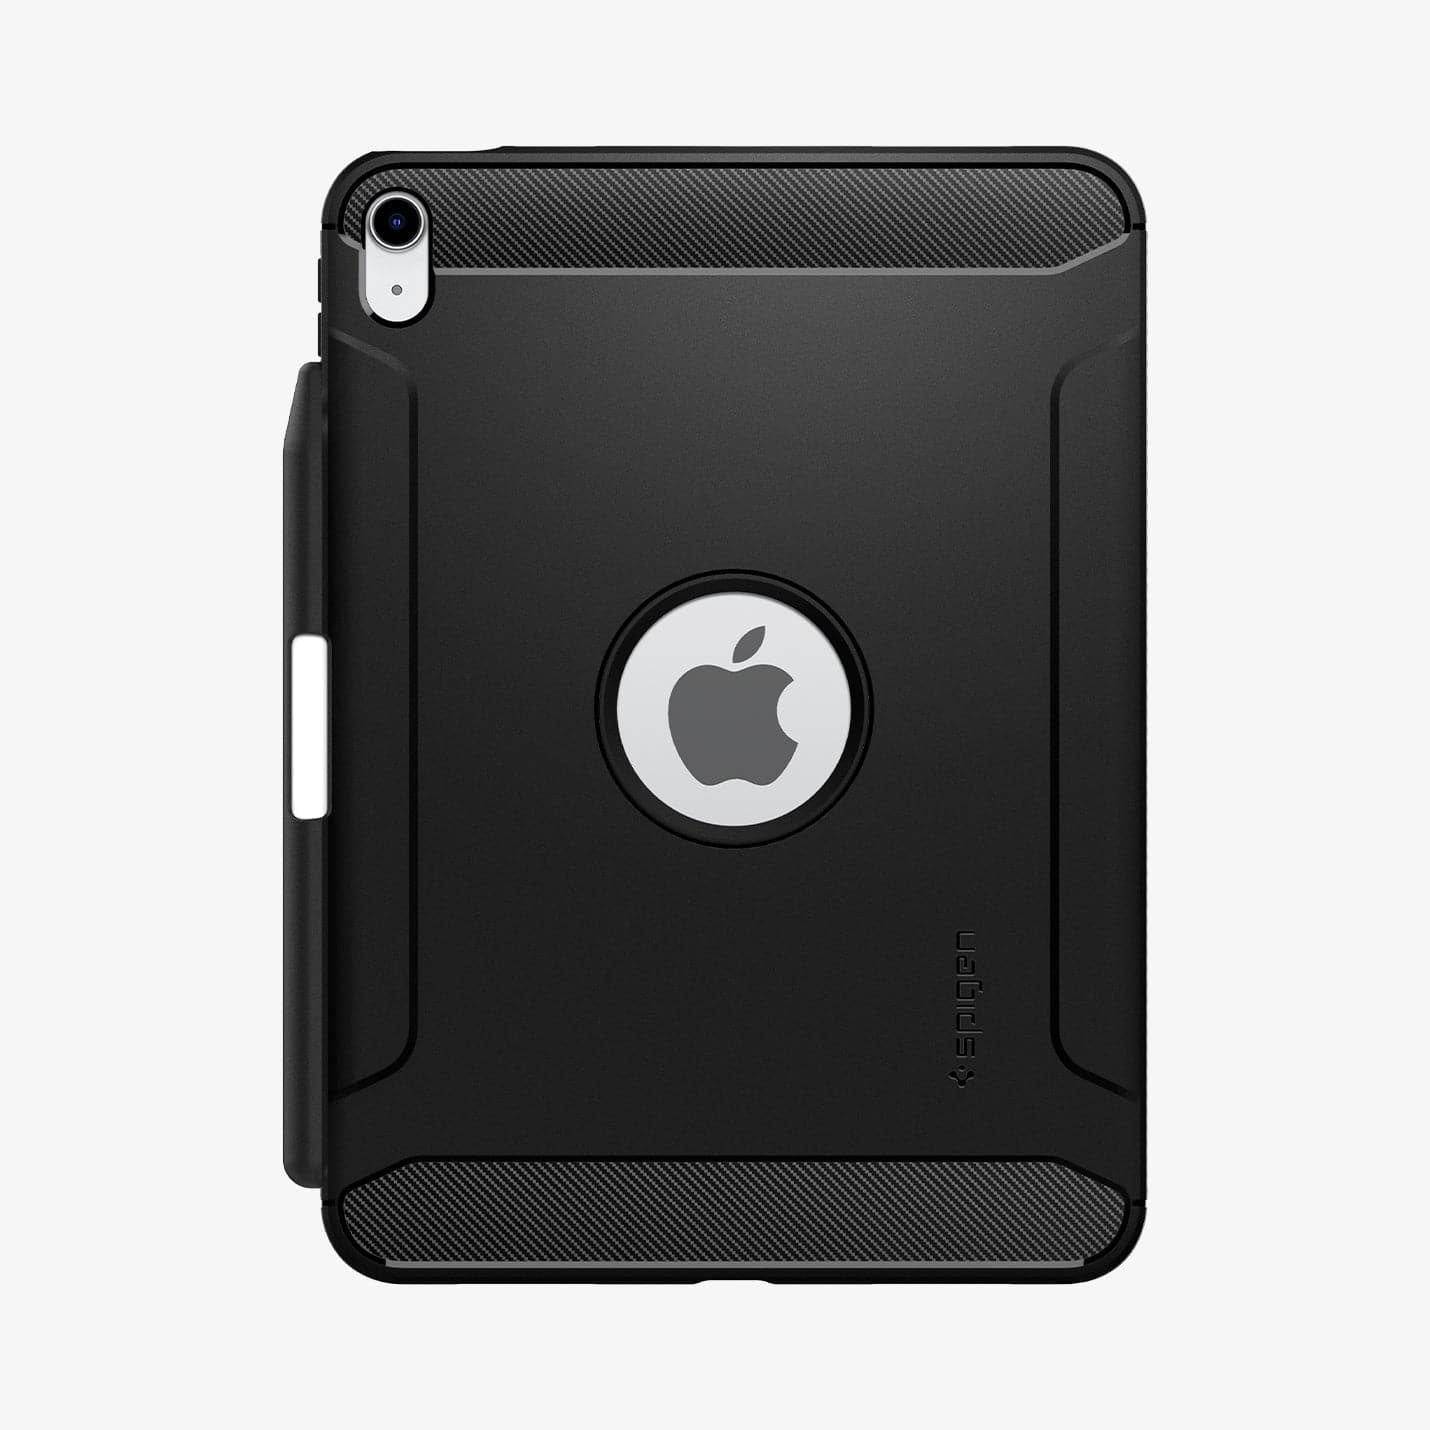 ACS05552 - iPad 10.9" Case Rugged Armor in black showing the back